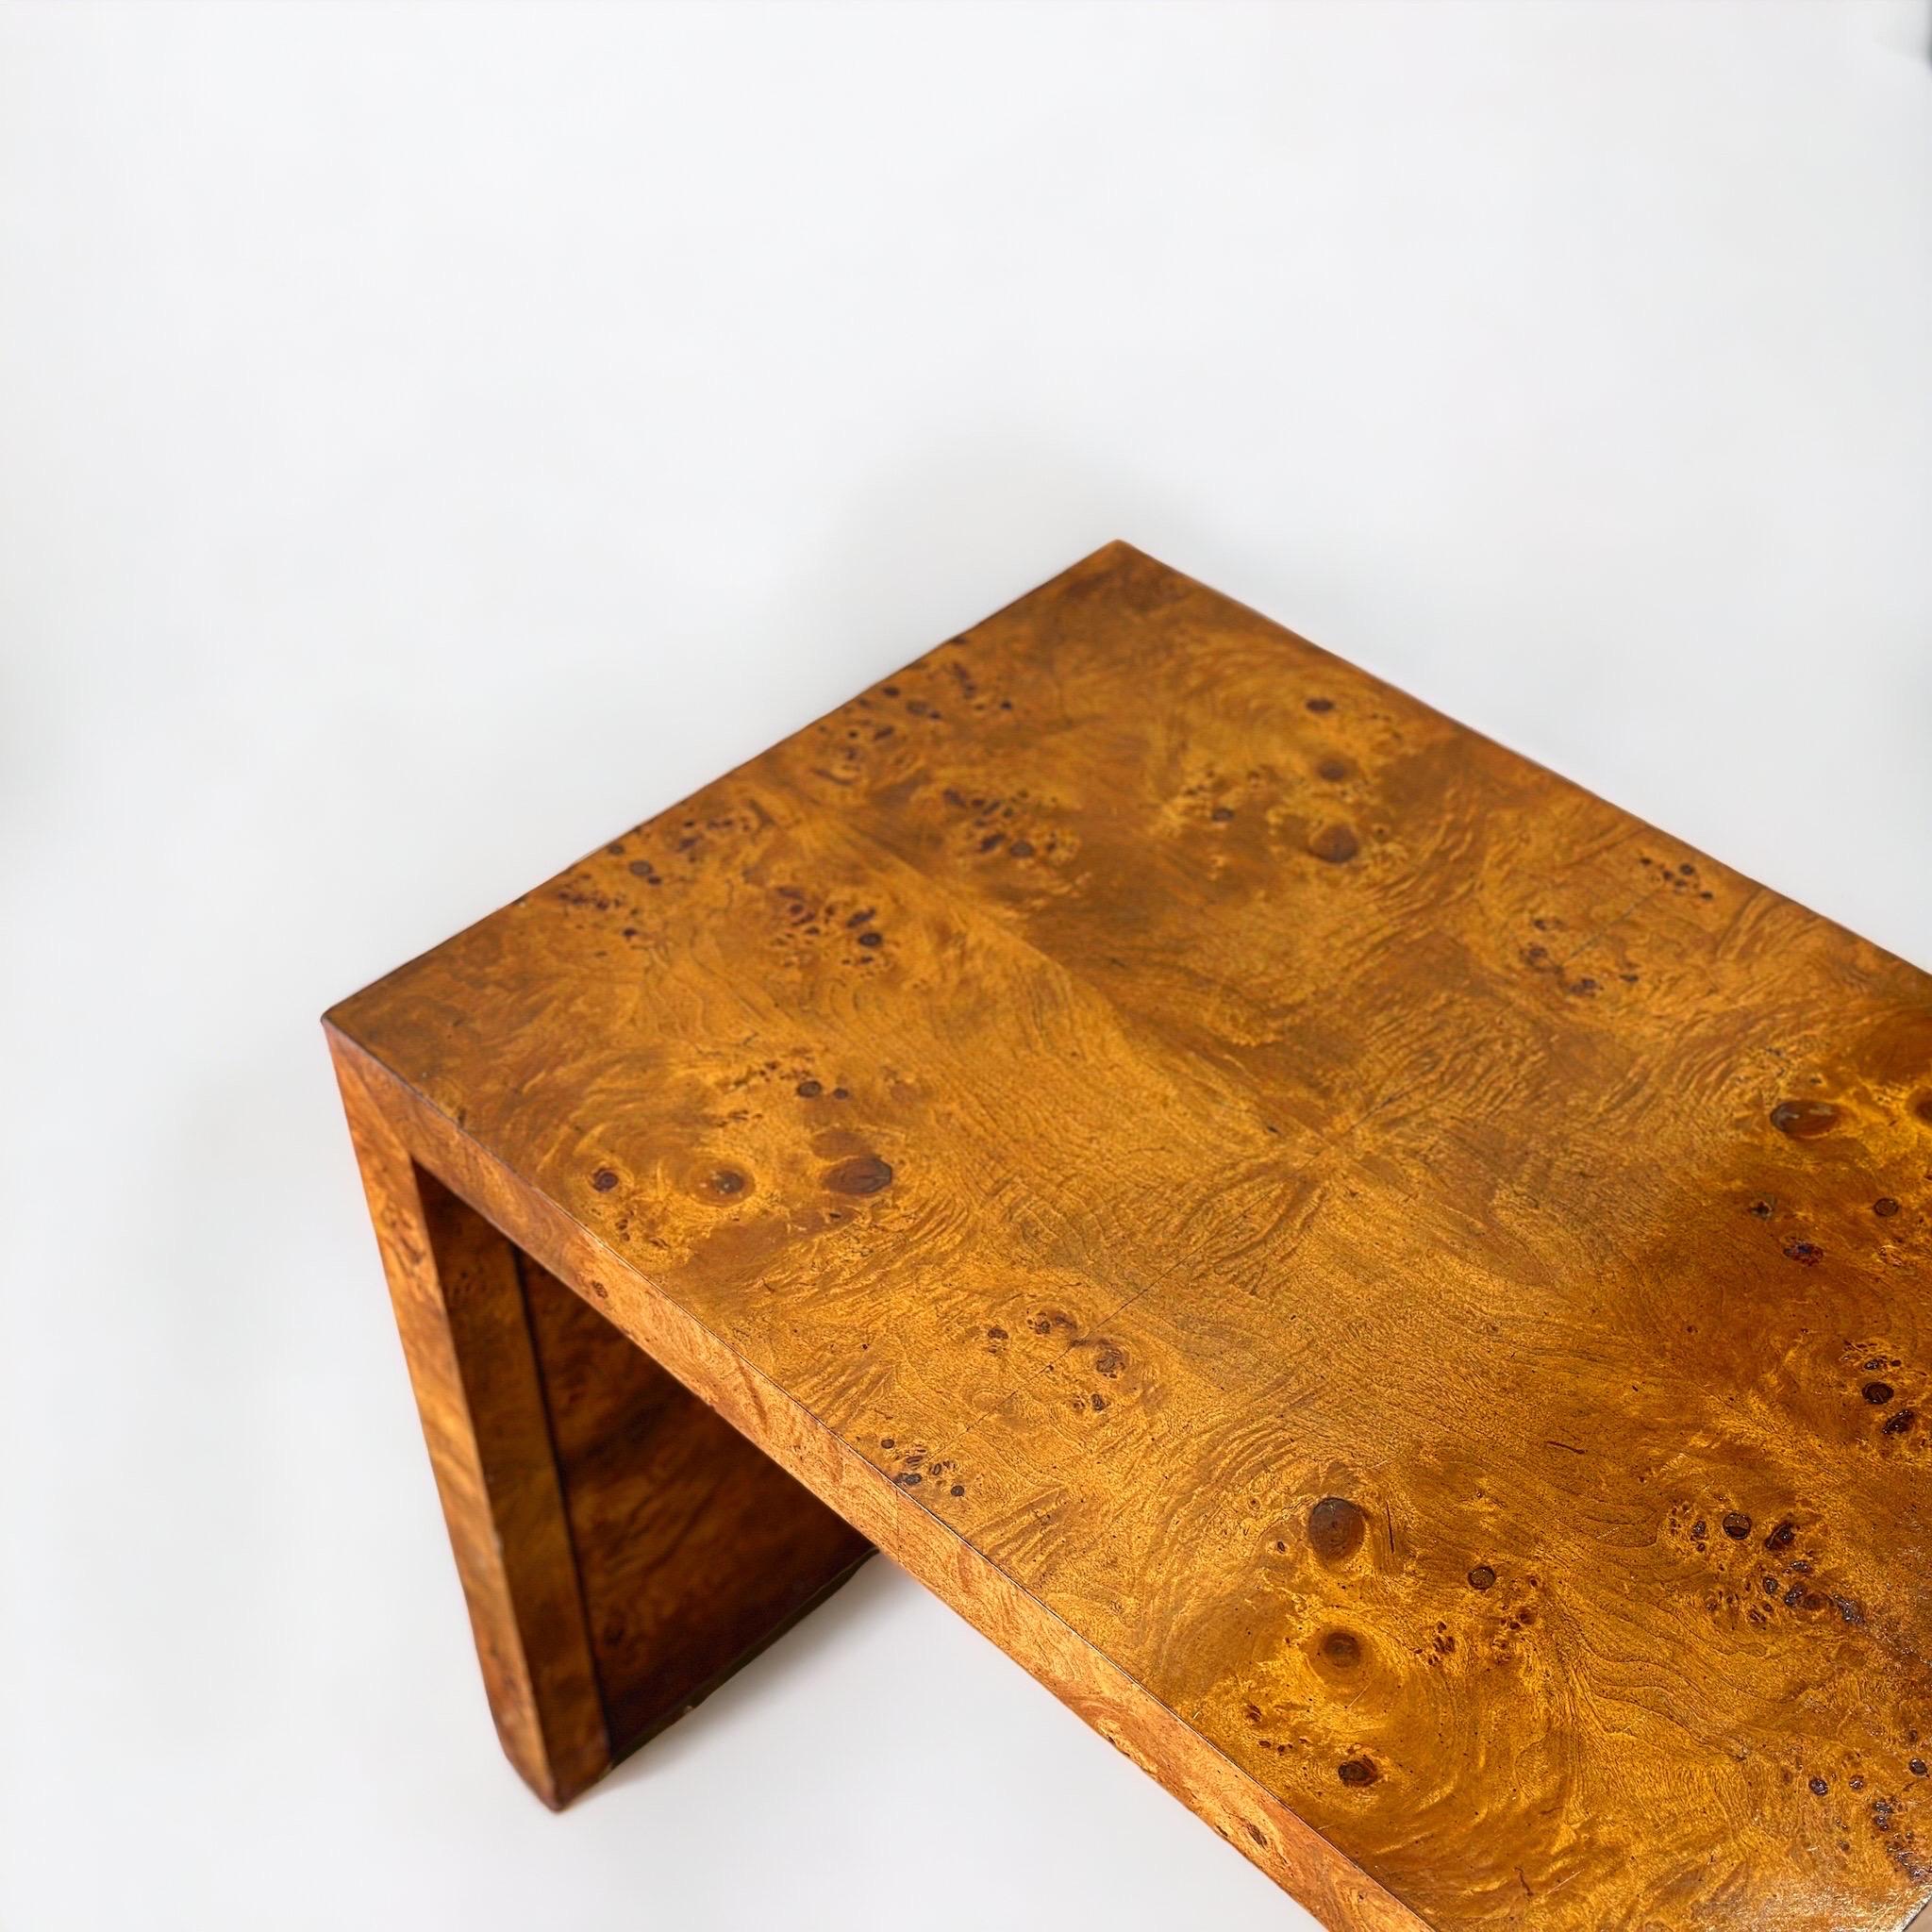 Mid-Century Modern waterfall Parsons style occasional table in burled olive wood, after Milo Baughman. Clean modern lines juxtaposed with the organic free flowing burl. Each table leg rests on .5